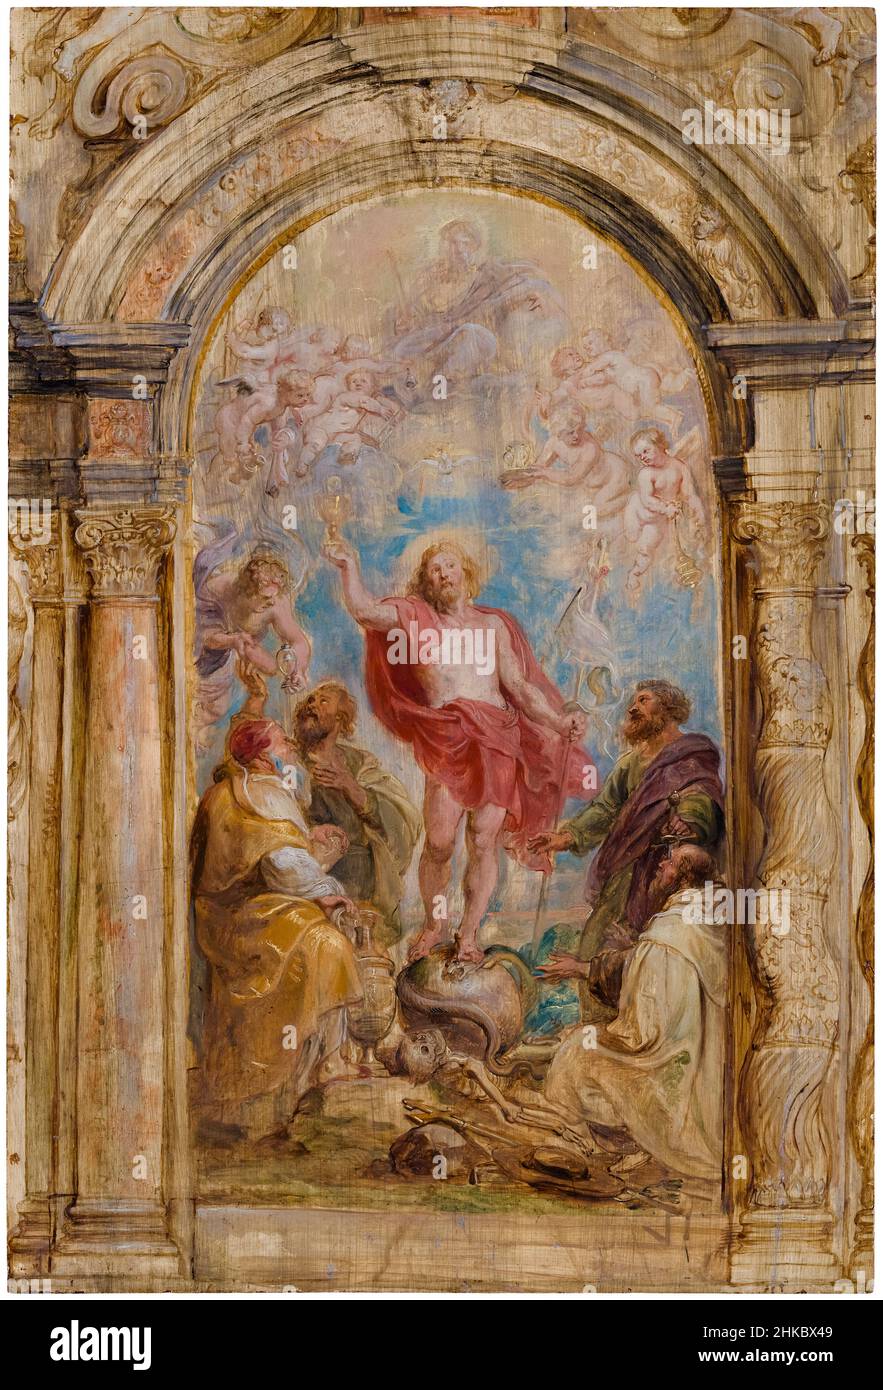 The Glorification of the Eucharist (oil sketch), painting by Peter Paul Rubens, 1630-1632 Stock Photo